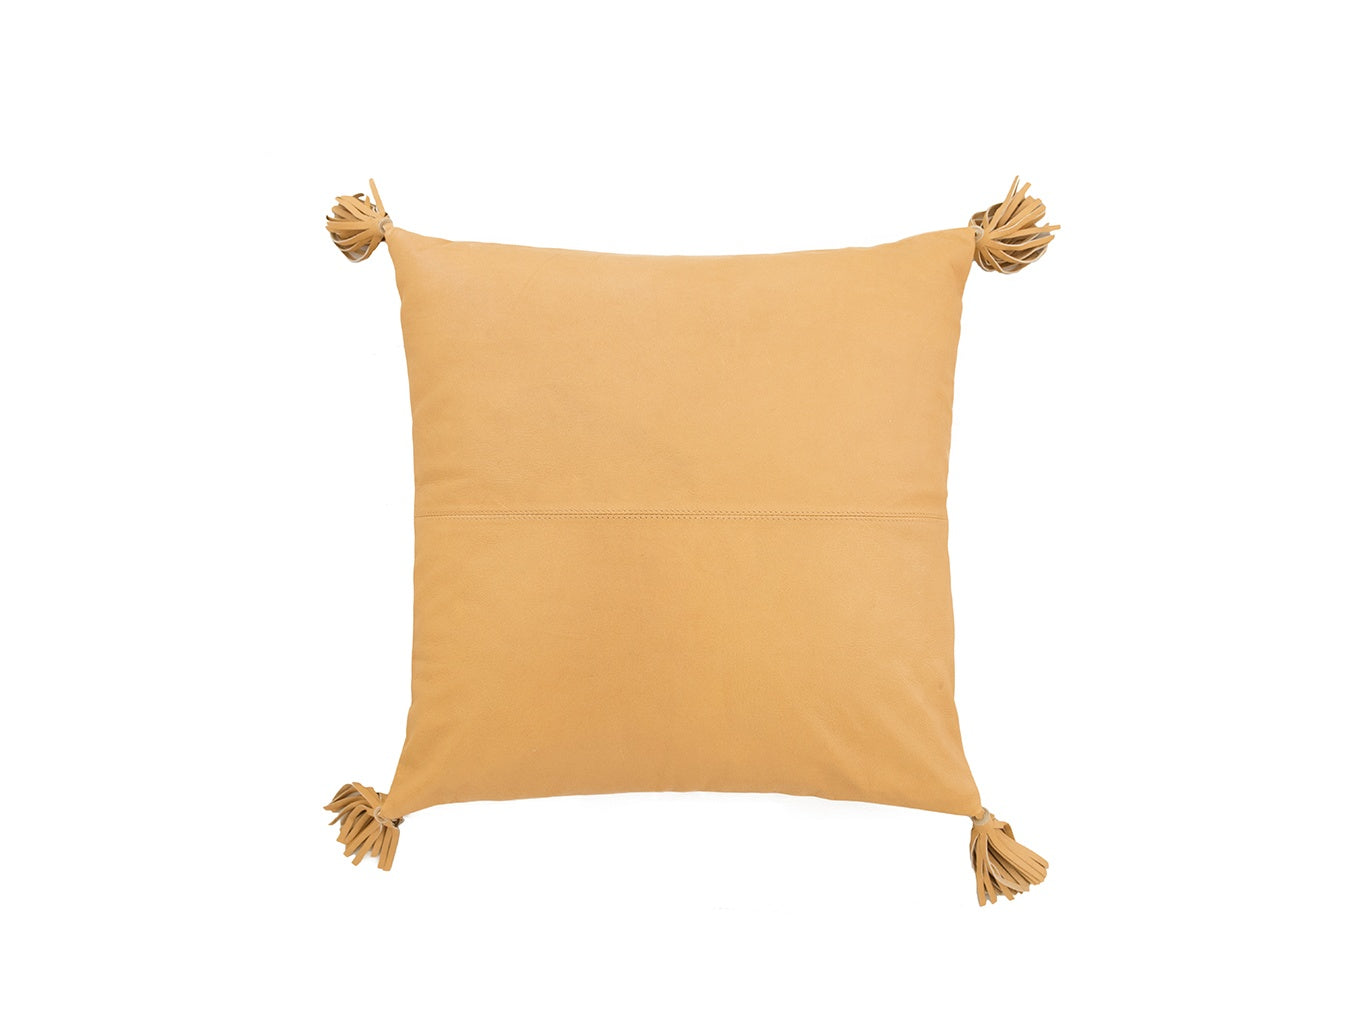 WM06-Full-Leather-Golden-Cushion-Cover